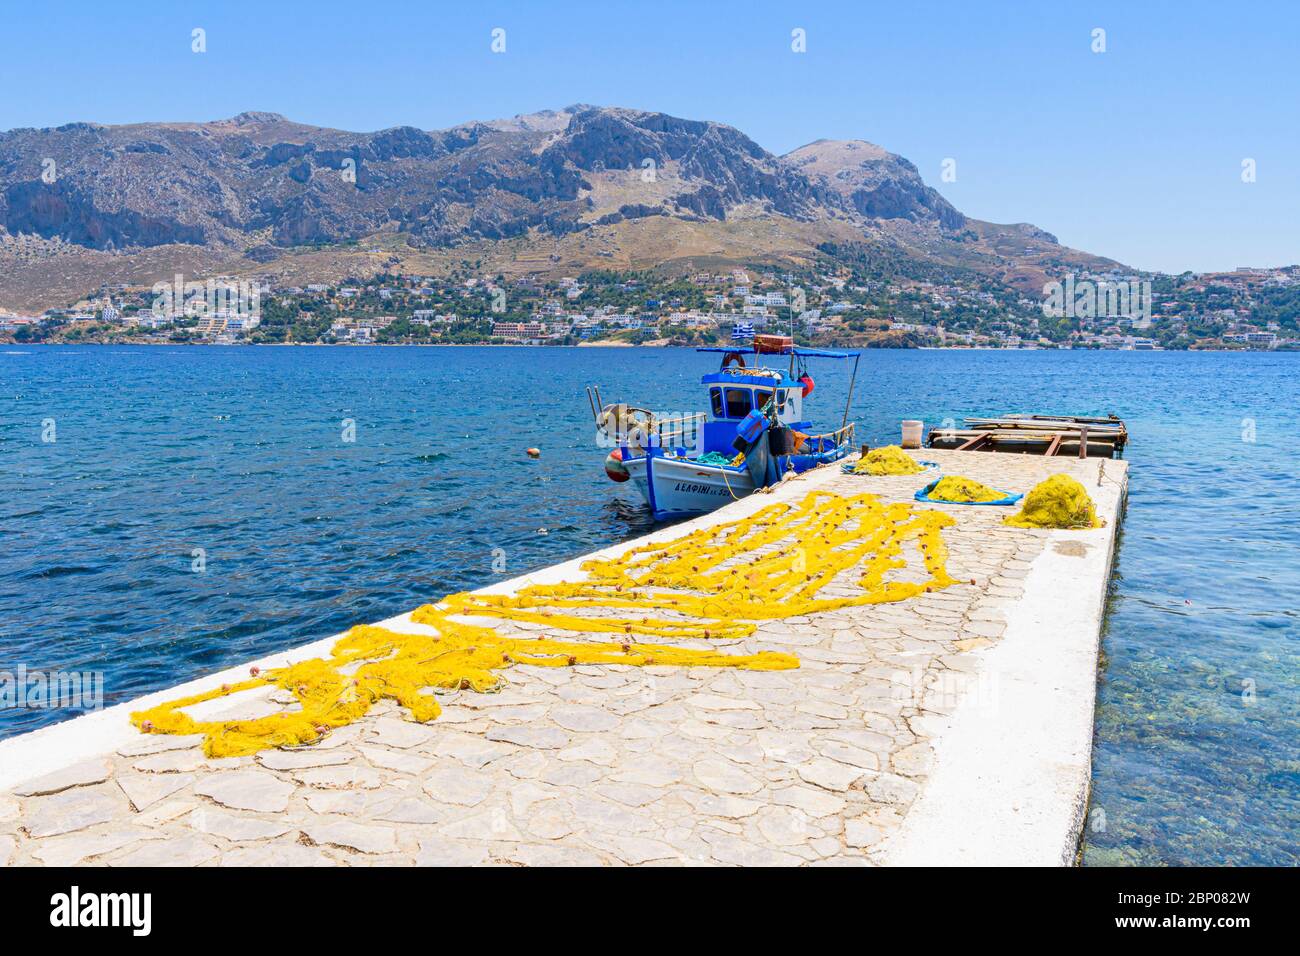 Fishing boat and yellow nets out to dry on the jetty of the small port town of Telendos Island, Kalymnos, Dodecanese, Greece Stock Photo